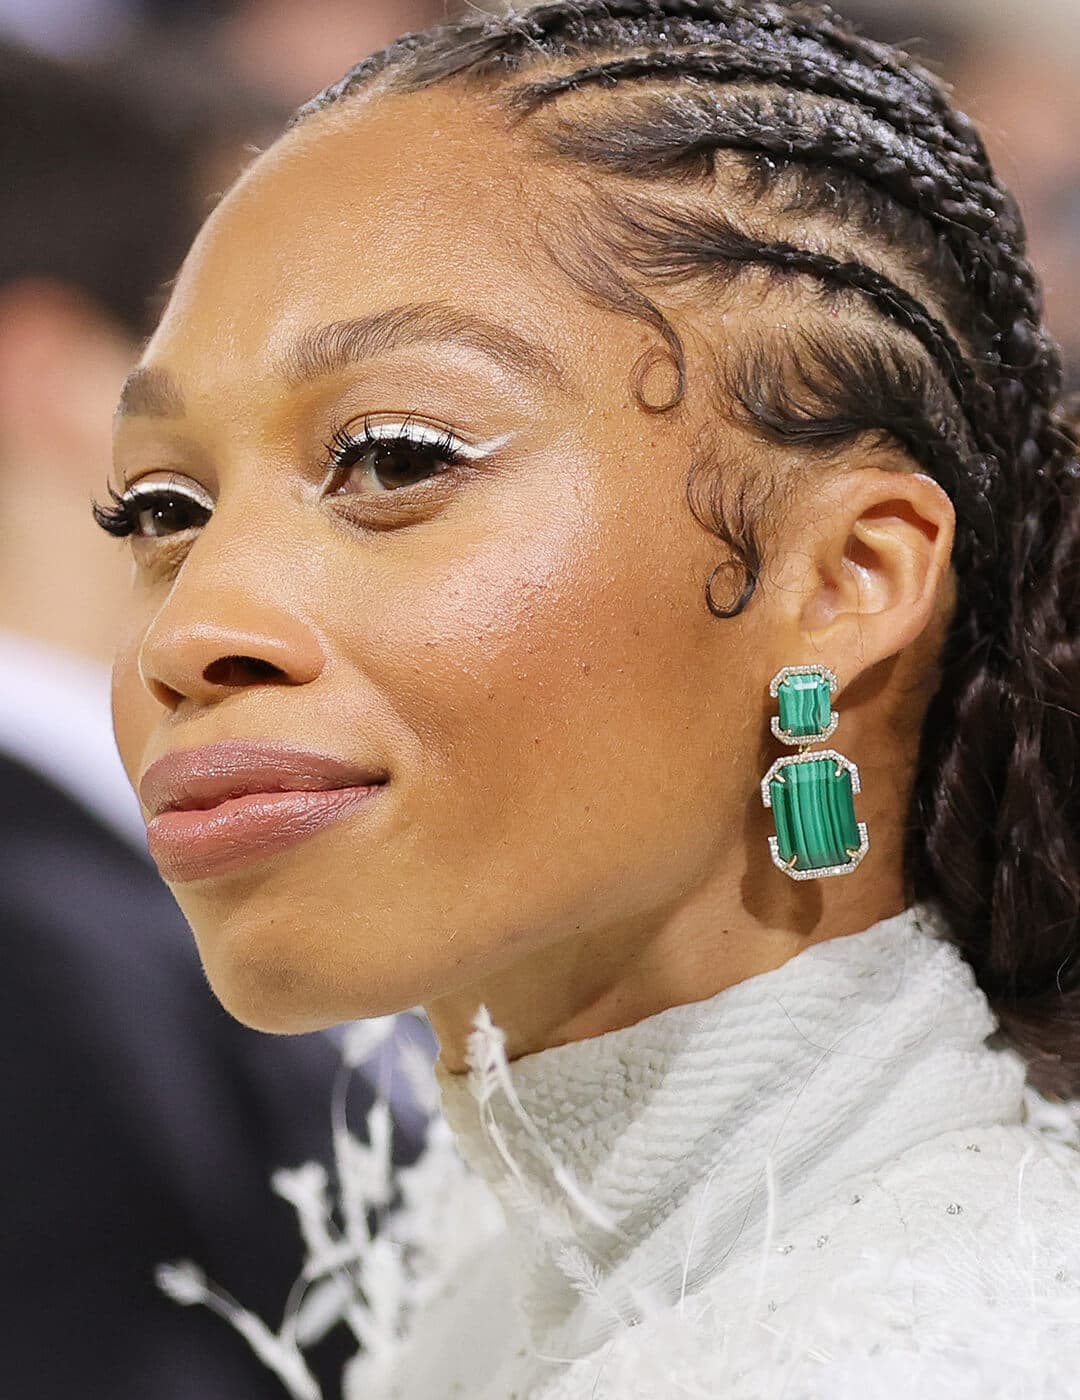 Allyson Felix rocking a white eyeliner makeup look, braided hairstyle, and bold, green earrings